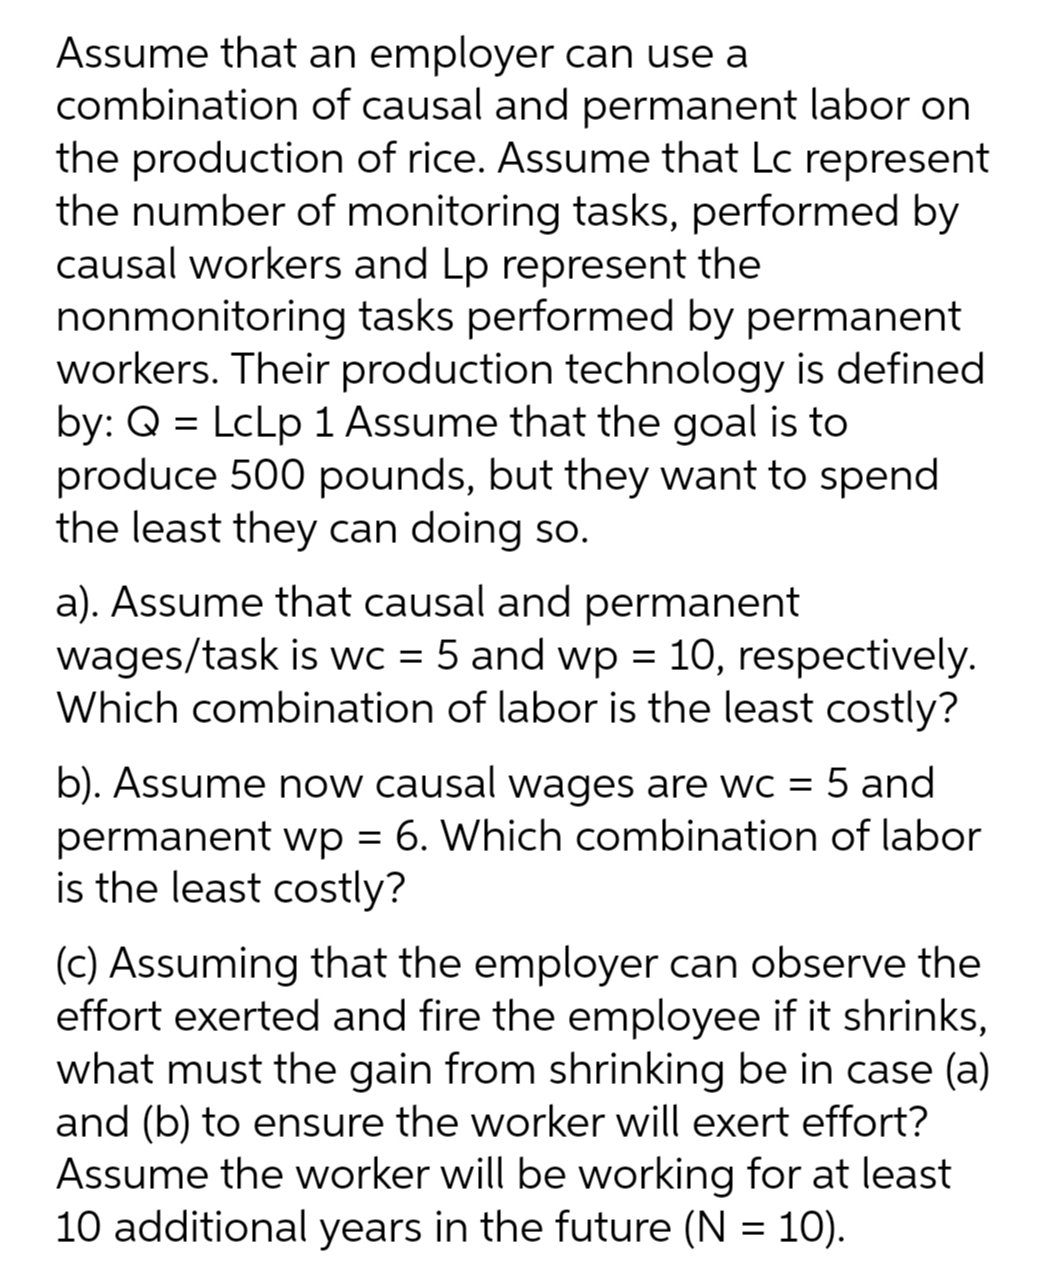 Assume that an employer can use a
combination of causal and permanent labor on
the production of rice. Assume that Lc represent
the number of monitoring tasks, performed by
causal workers and Lp represent the
nonmonitoring tasks performed by permanent
workers. Their production technology is defined
by: Q = LcLp 1 Assume that the goal is to
produce 500 pounds, but they want to spend
the least they can doing so.
a). Assume that causal and permanent
wages/task is wc = 5 and wp = 10, respectively.
Which combination of labor is the least costly?
b). Assume now causal wages are wc = 5 and
permanent wp = 6. Which combination of labor
is the least costly?
(c) Assuming that the employer can observe the
effort exerted and fire the employee if it shrinks,
what must the gain from shrinking be in case (a)
and (b) to ensure the worker will exert effort?
Assume the worker will be working for at least
10 additional years in the future (N = 10).
